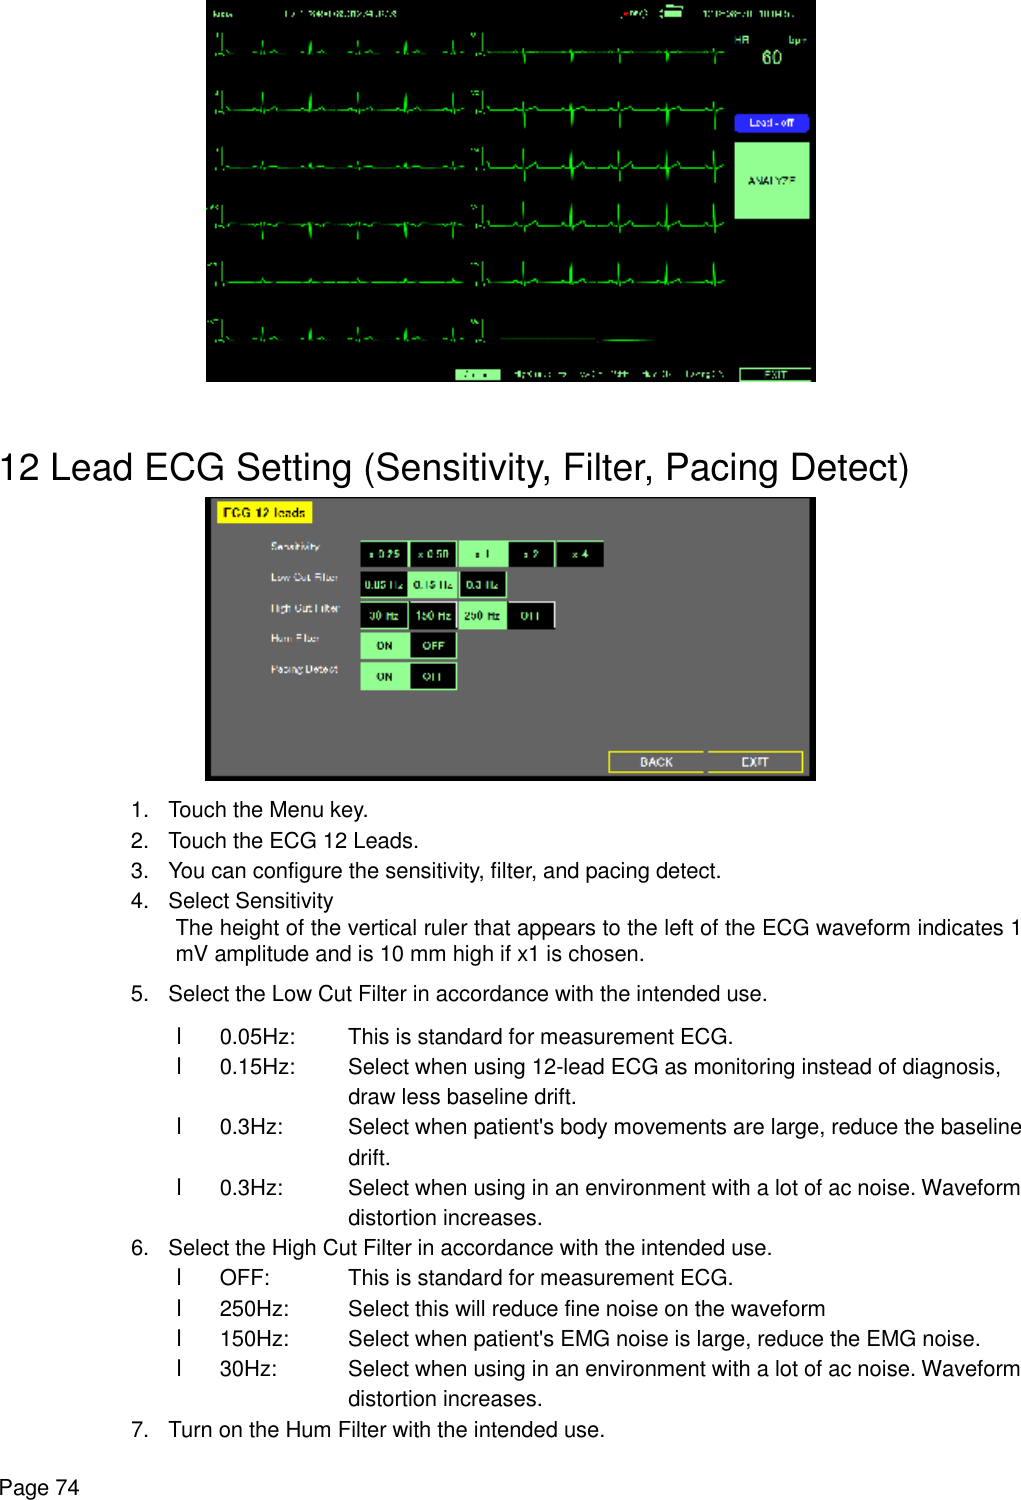    Page 74   12 Lead ECG Setting (Sensitivity, Filter, Pacing Detect)  1. Touch the Menu key. 2. Touch the ECG 12 Leads. 3. You can configure the sensitivity, filter, and pacing detect. 4. Select Sensitivity The height of the vertical ruler that appears to the left of the ECG waveform indicates 1 mV amplitude and is 10 mm high if x1 is chosen. 5. Select the Low Cut Filter in accordance with the intended use. l 0.05Hz:  This is standard for measurement ECG. l 0.15Hz: Select when using 12-lead ECG as monitoring instead of diagnosis,    draw less baseline drift. l 0.3Hz: Select when patient&apos;s body movements are large, reduce the baseline   drift. l 0.3Hz: Select when using in an environment with a lot of ac noise. Waveform    distortion increases. 6. Select the High Cut Filter in accordance with the intended use. l OFF:  This is standard for measurement ECG. l 250Hz: Select this will reduce fine noise on the waveform l 150Hz: Select when patient&apos;s EMG noise is large, reduce the EMG noise. l 30Hz: Select when using in an environment with a lot of ac noise. Waveform    distortion increases. 7. Turn on the Hum Filter with the intended use. 